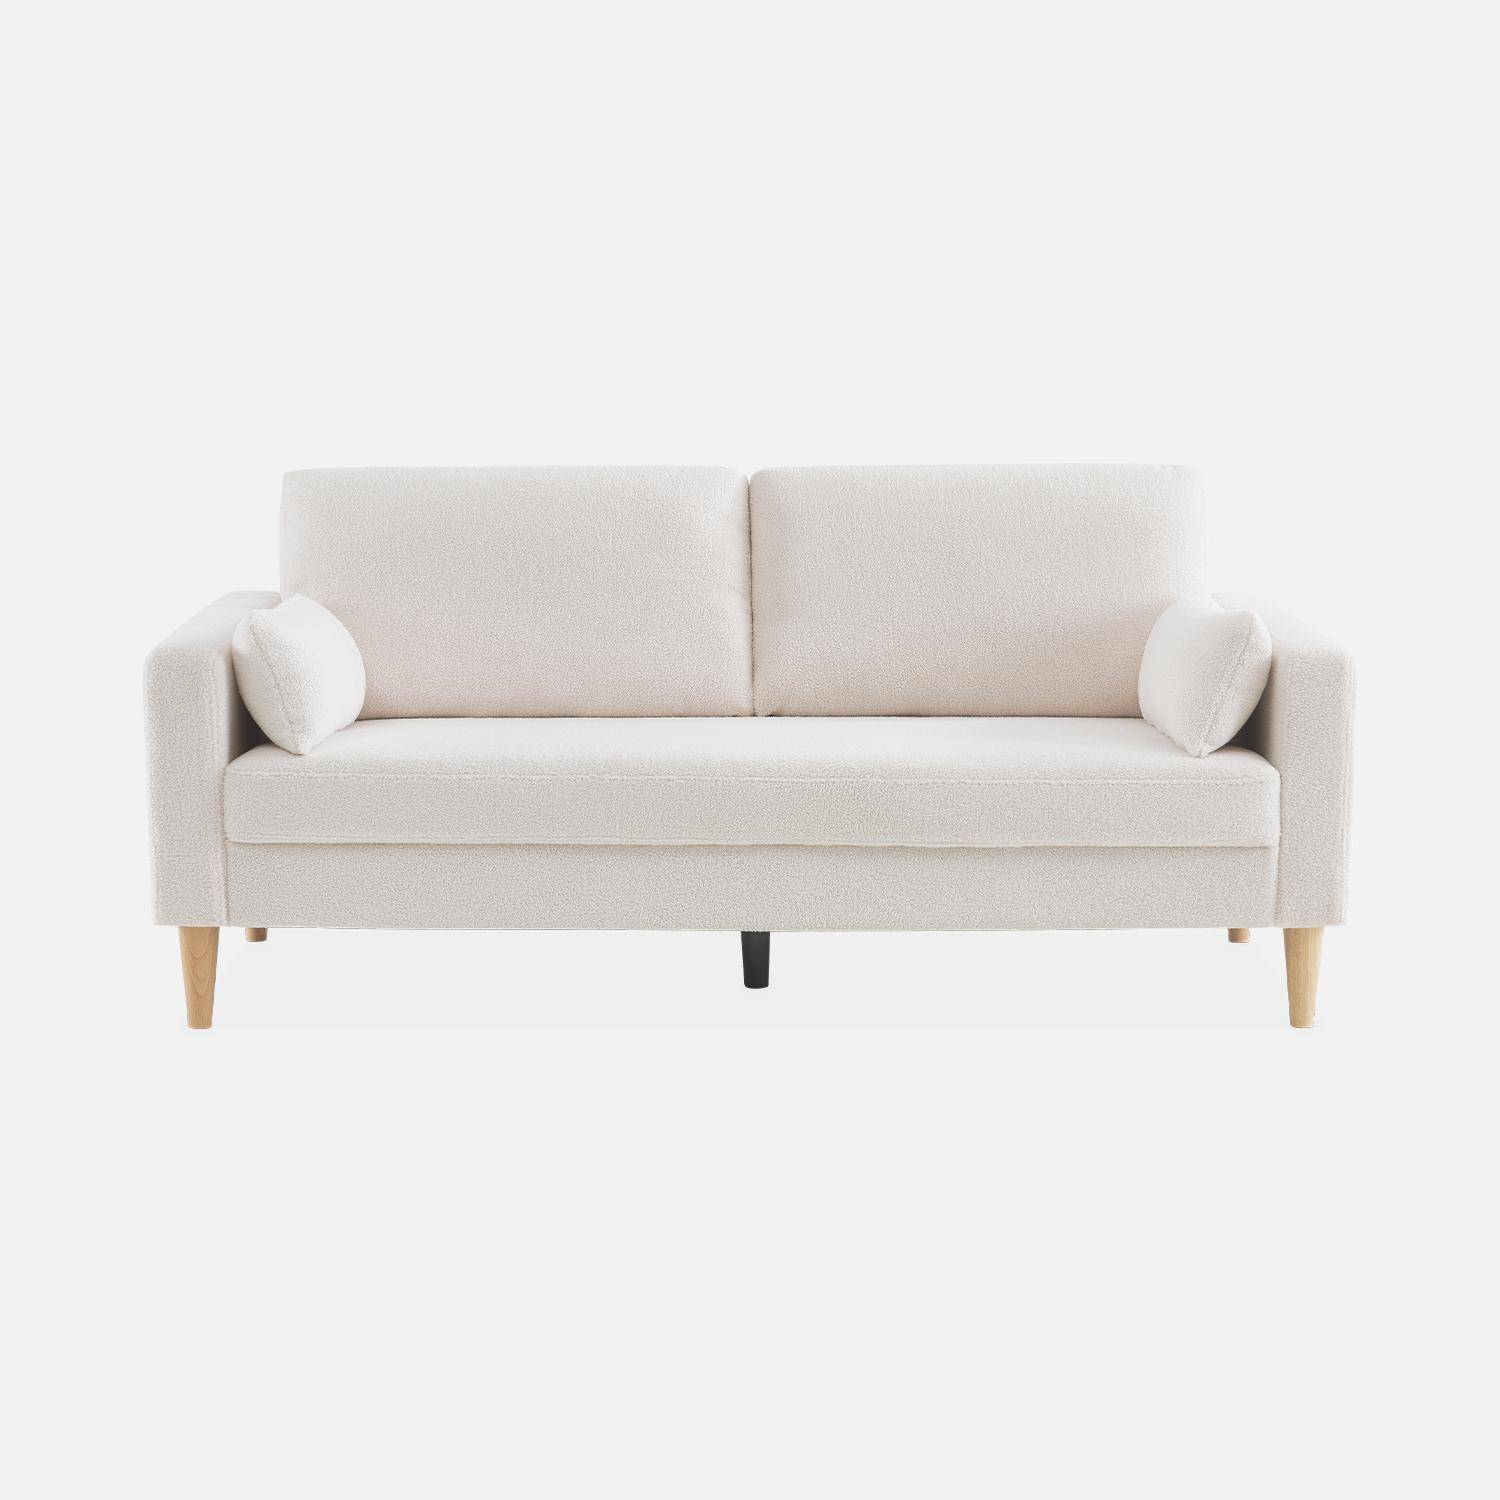 Large 3-seater sofa Scandi-style with wooden legs - Bjorn - white boucle,sweeek,Photo4